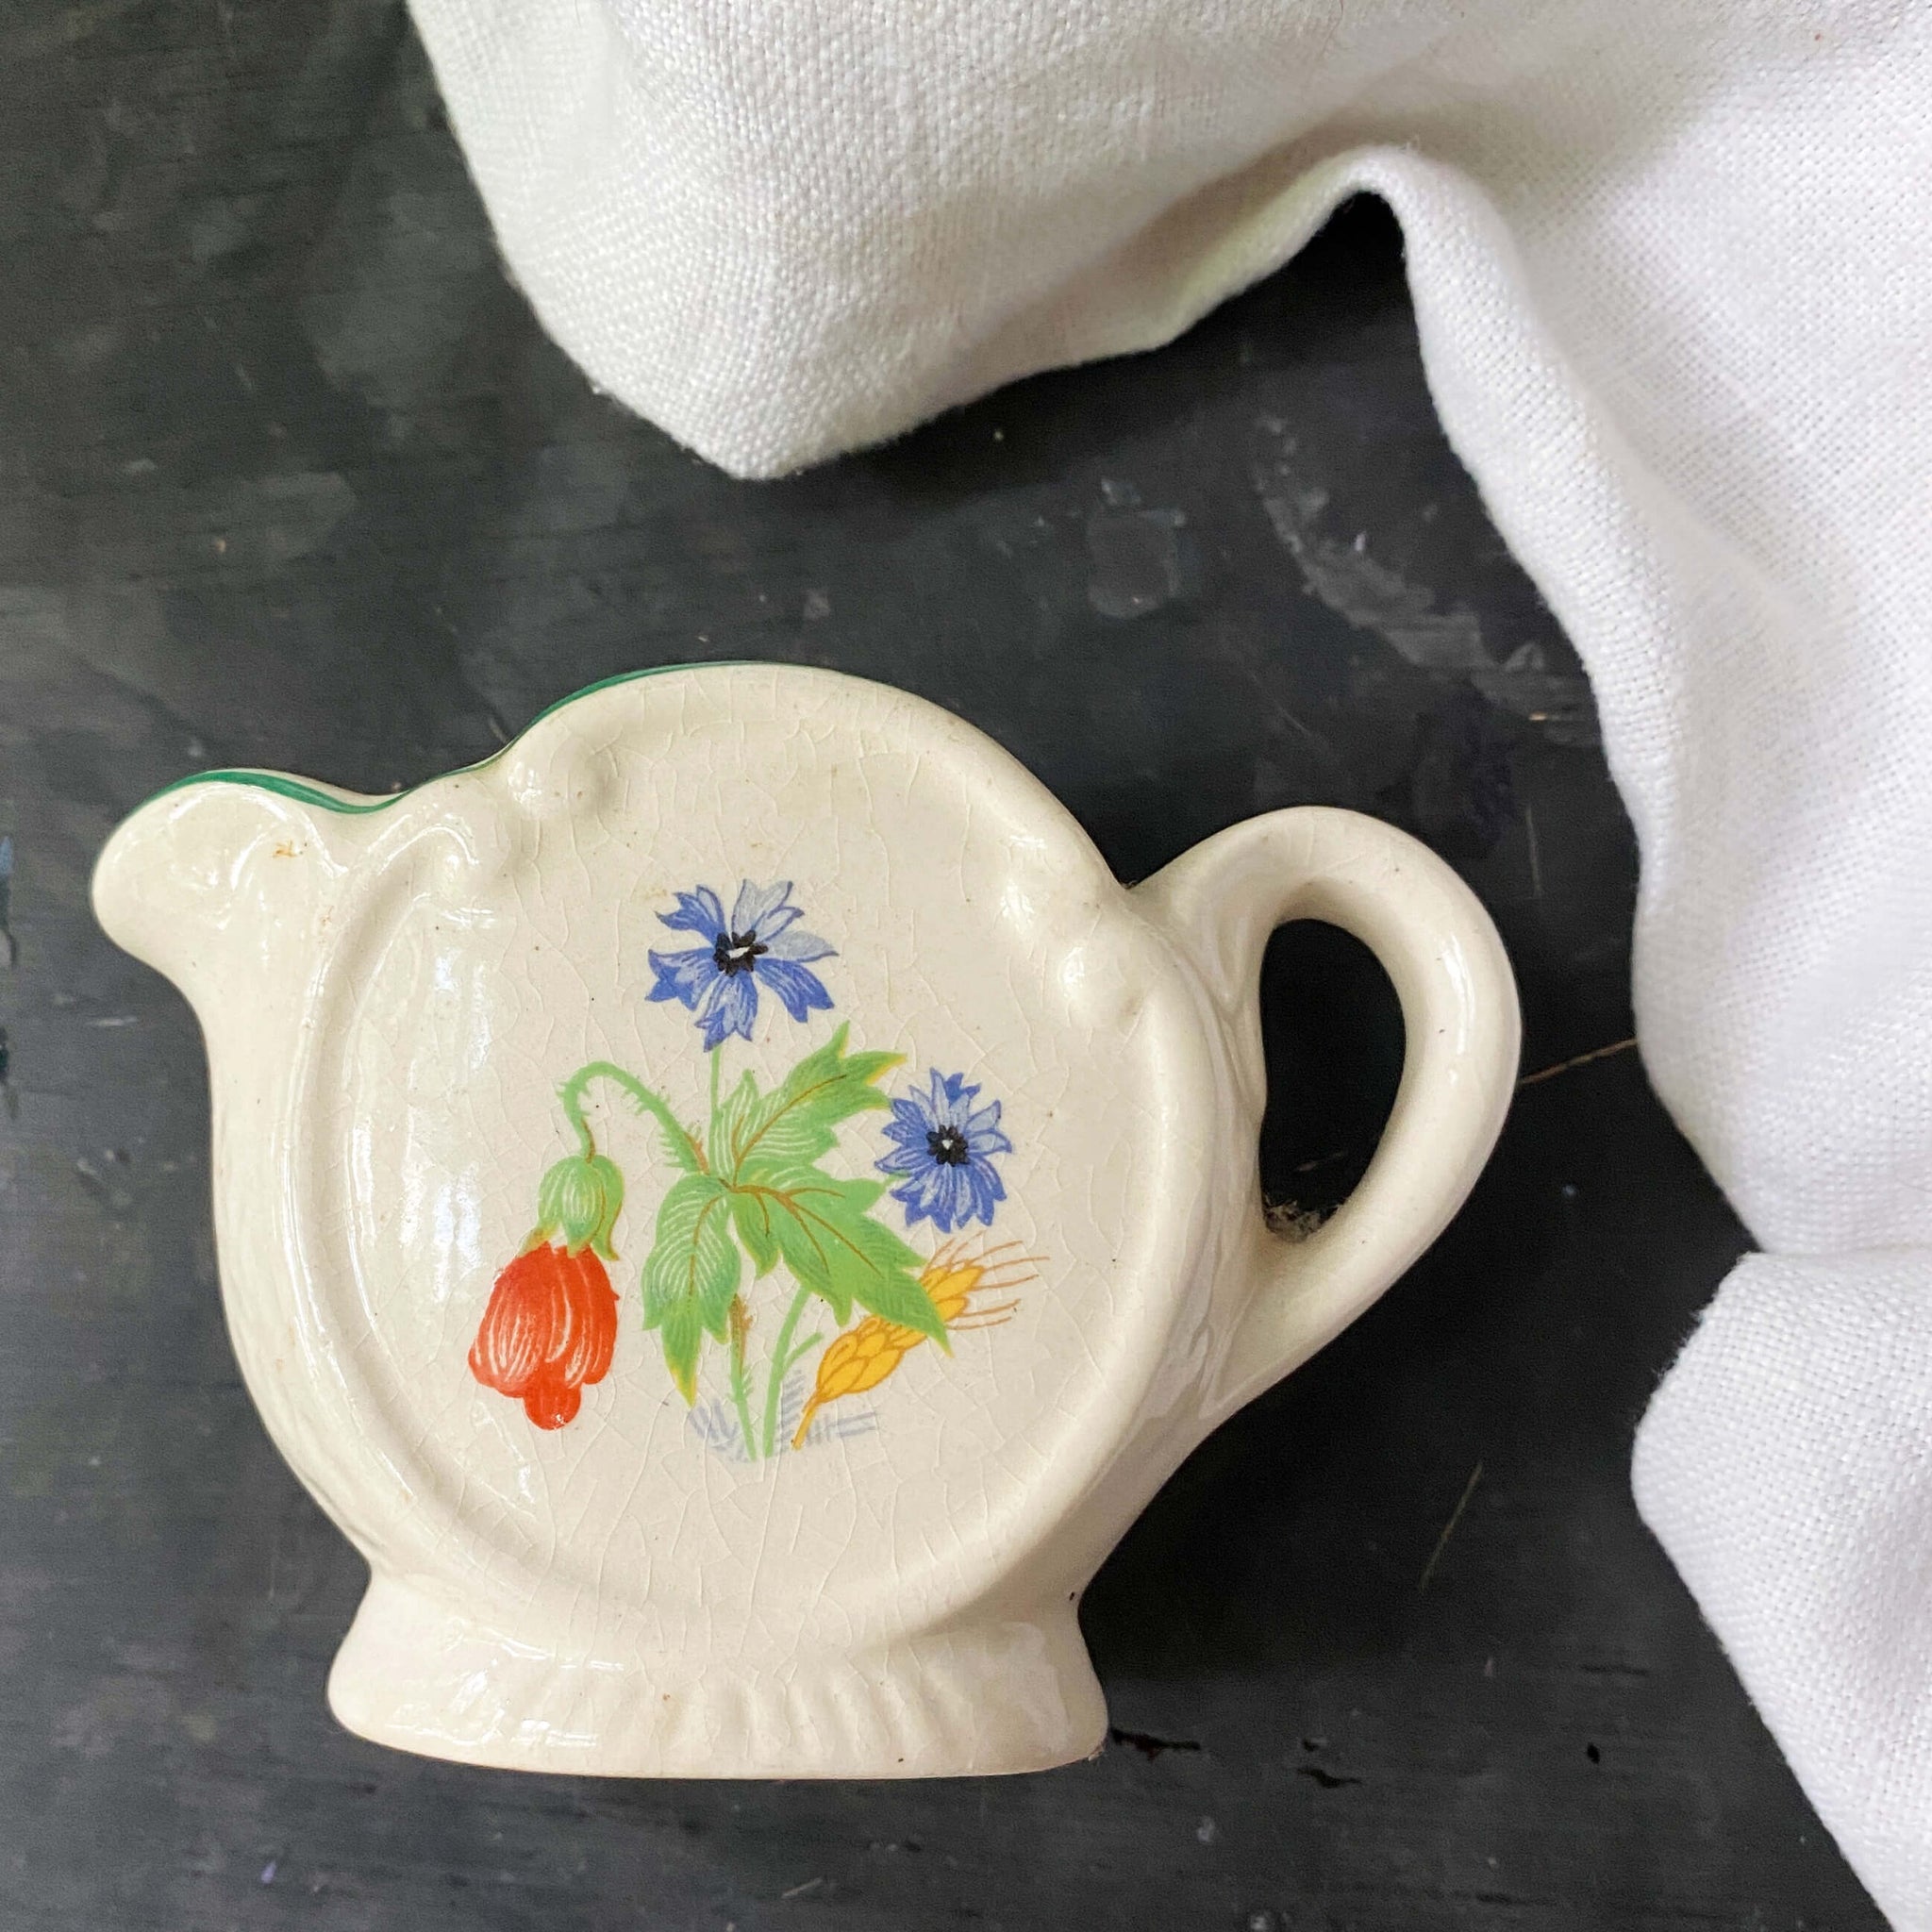 Vintage 1930s Individual Floral Creamer Made in England